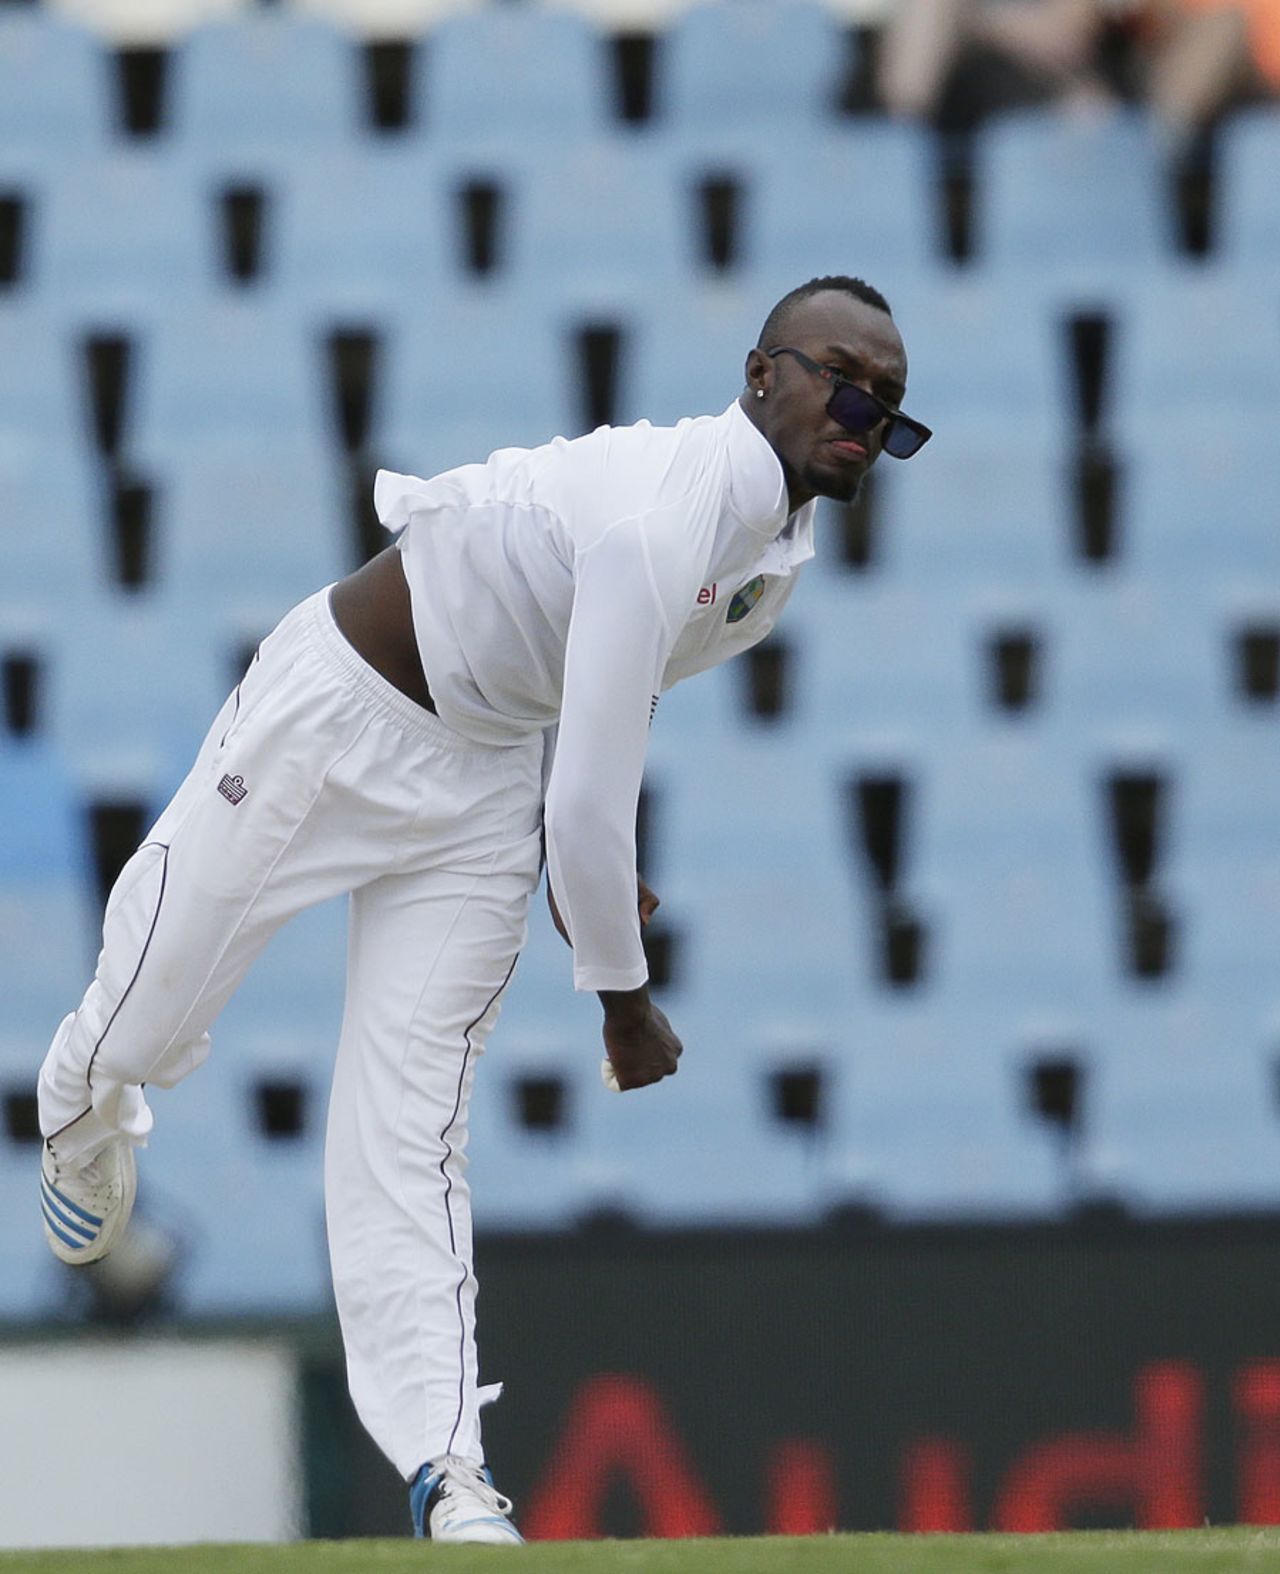 Jermaine Blackwood's sunglasses fall off as he sends down some gentle offspin, South Africa v West Indies, 1st Test, Centurion, 2nd day, December 18, 2014